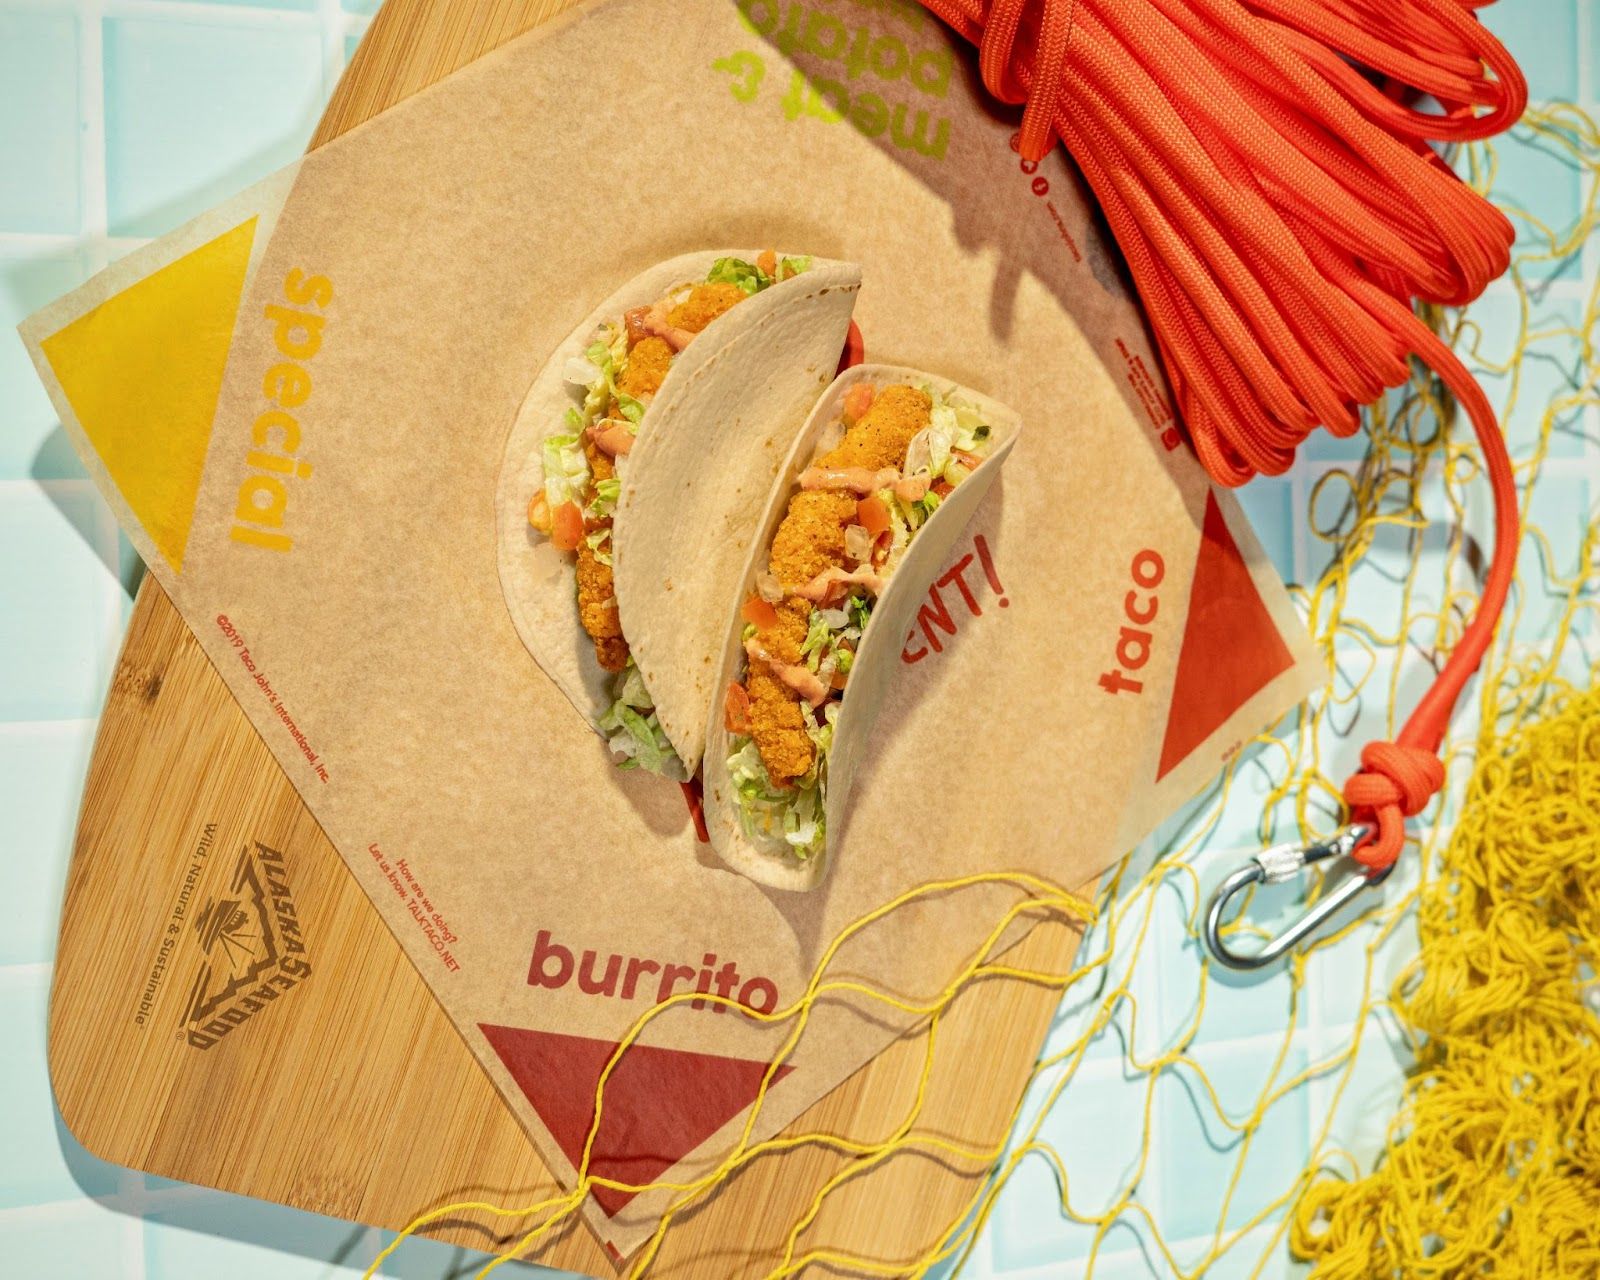 Taco John's Fish Tacos are Back, Saucing Up a Brand New Improvement to a Classic Offering